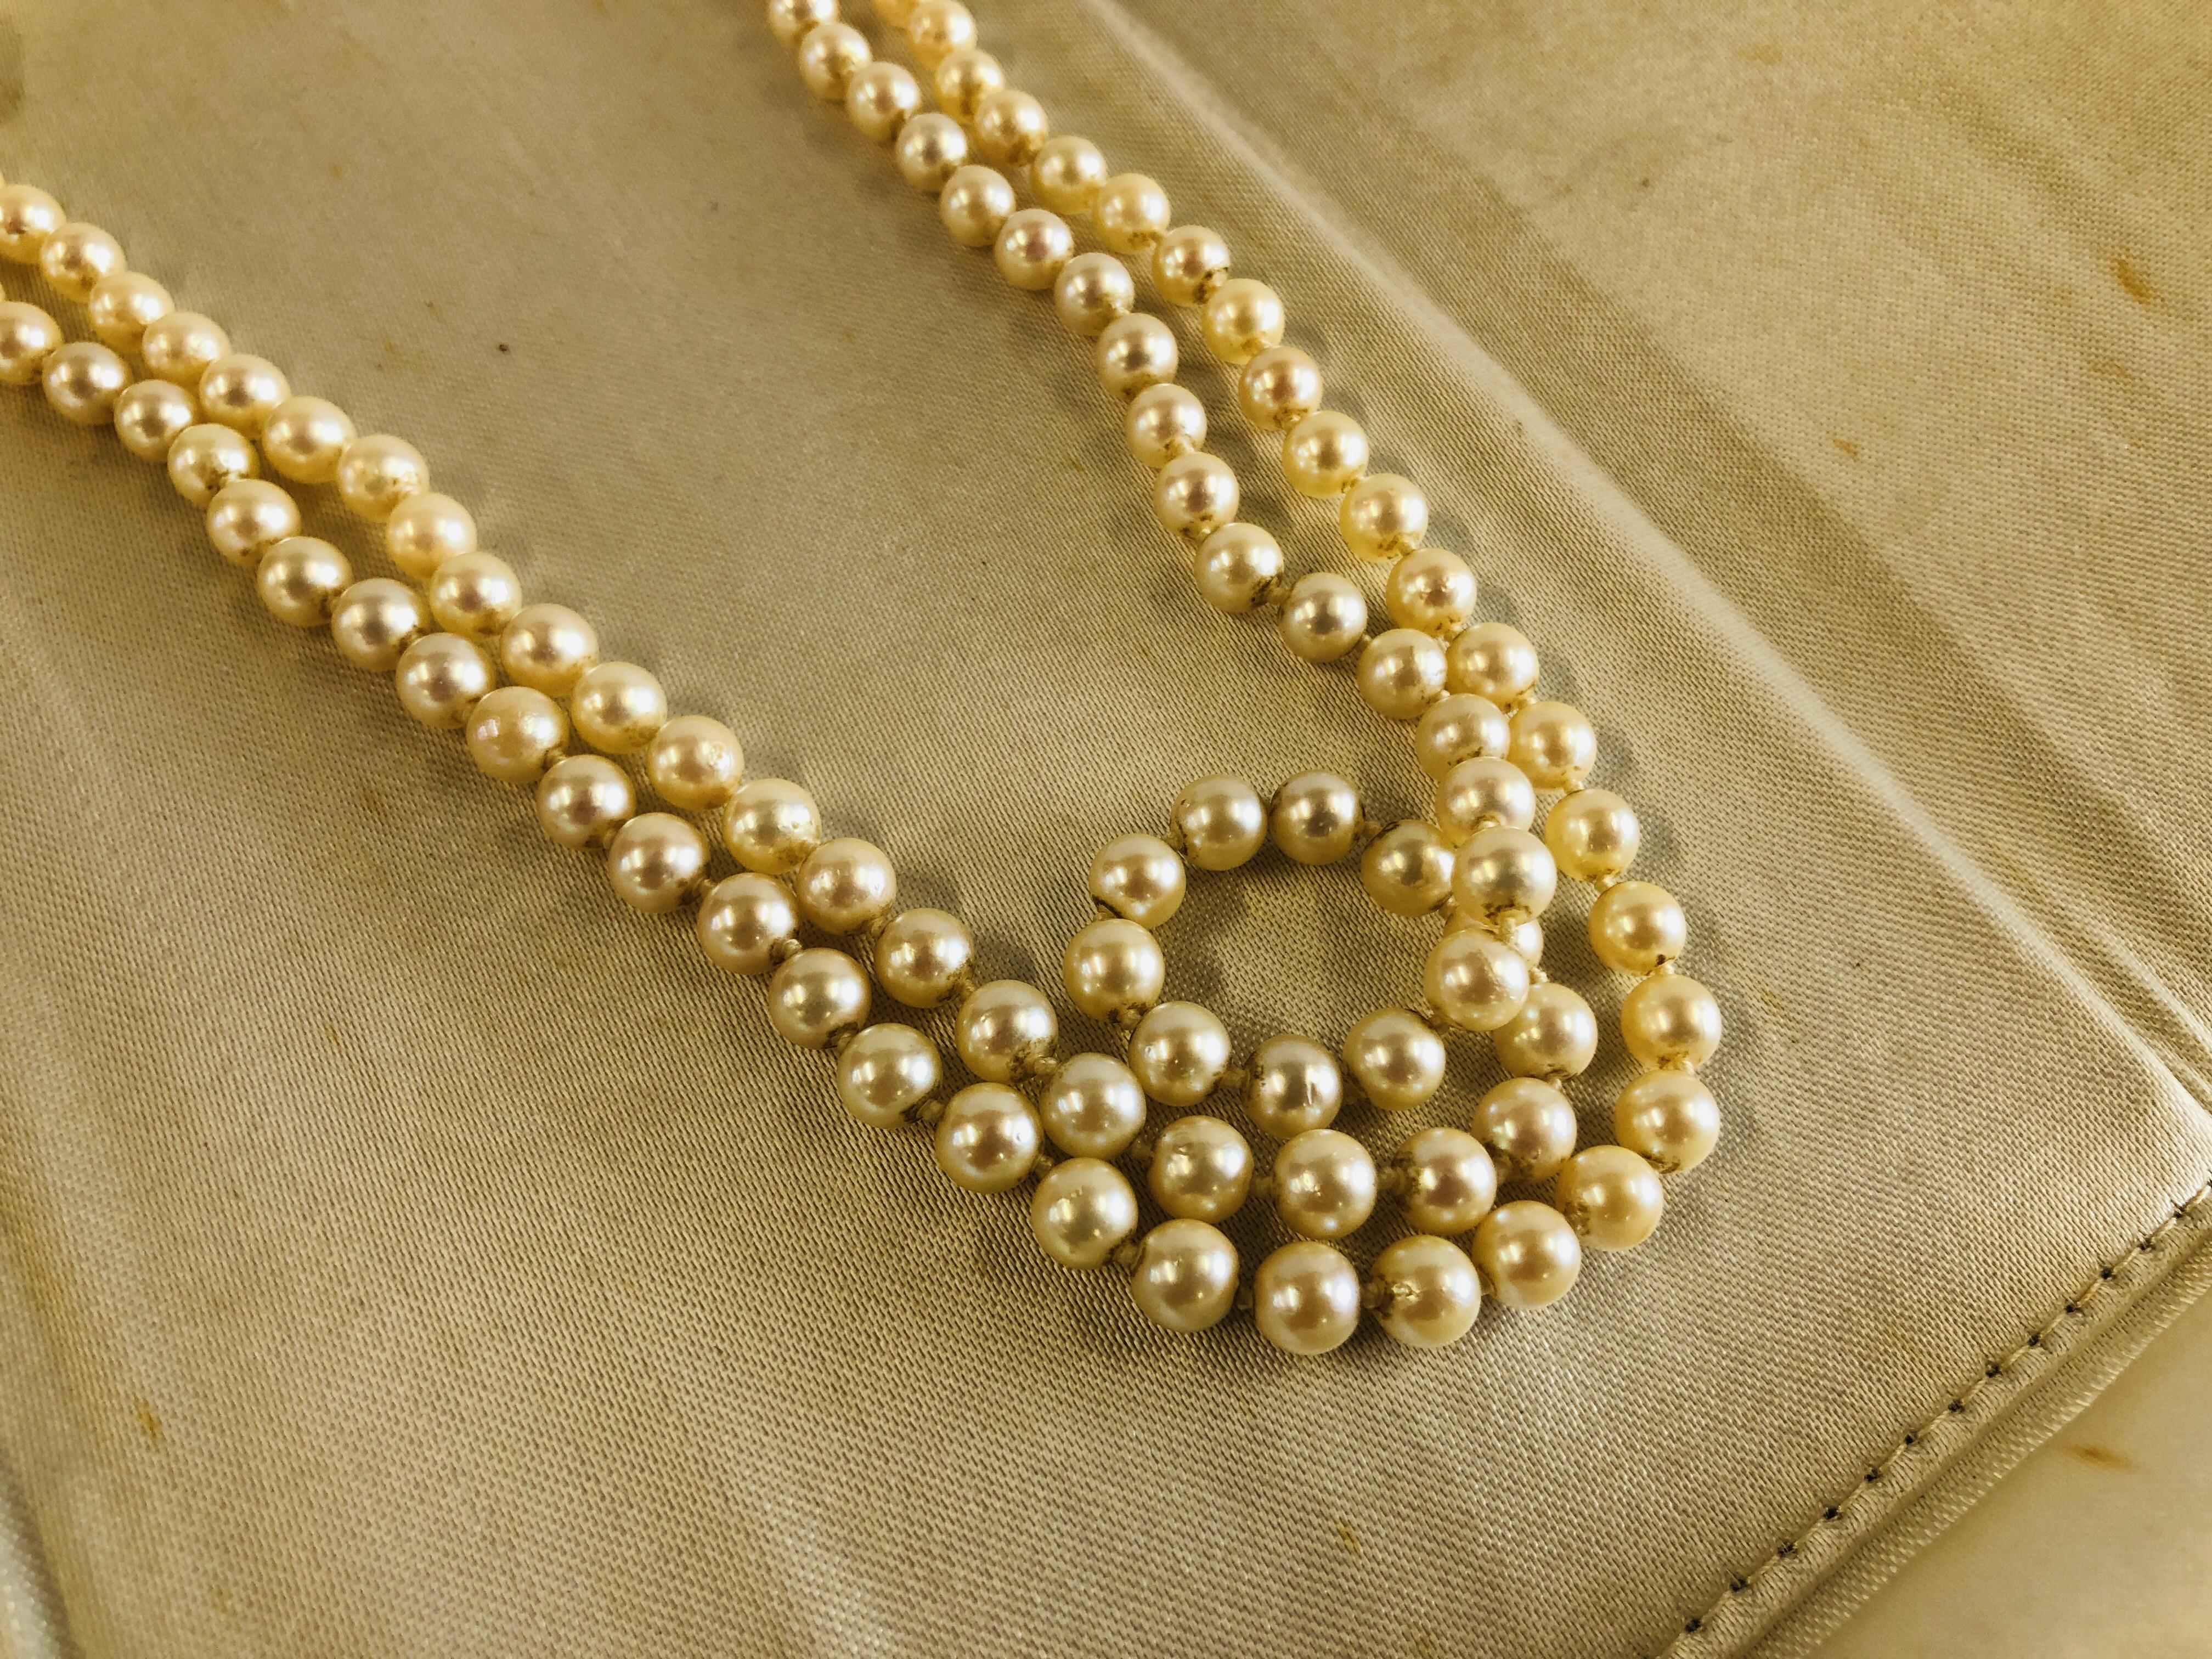 A VINTAGE DOUBLE ROW PEARL NECKLACE BY "MIKIMOTO" ALONG WITH AN ORIGINAL VINTAGE MIKIMOTO SILK - Image 2 of 6